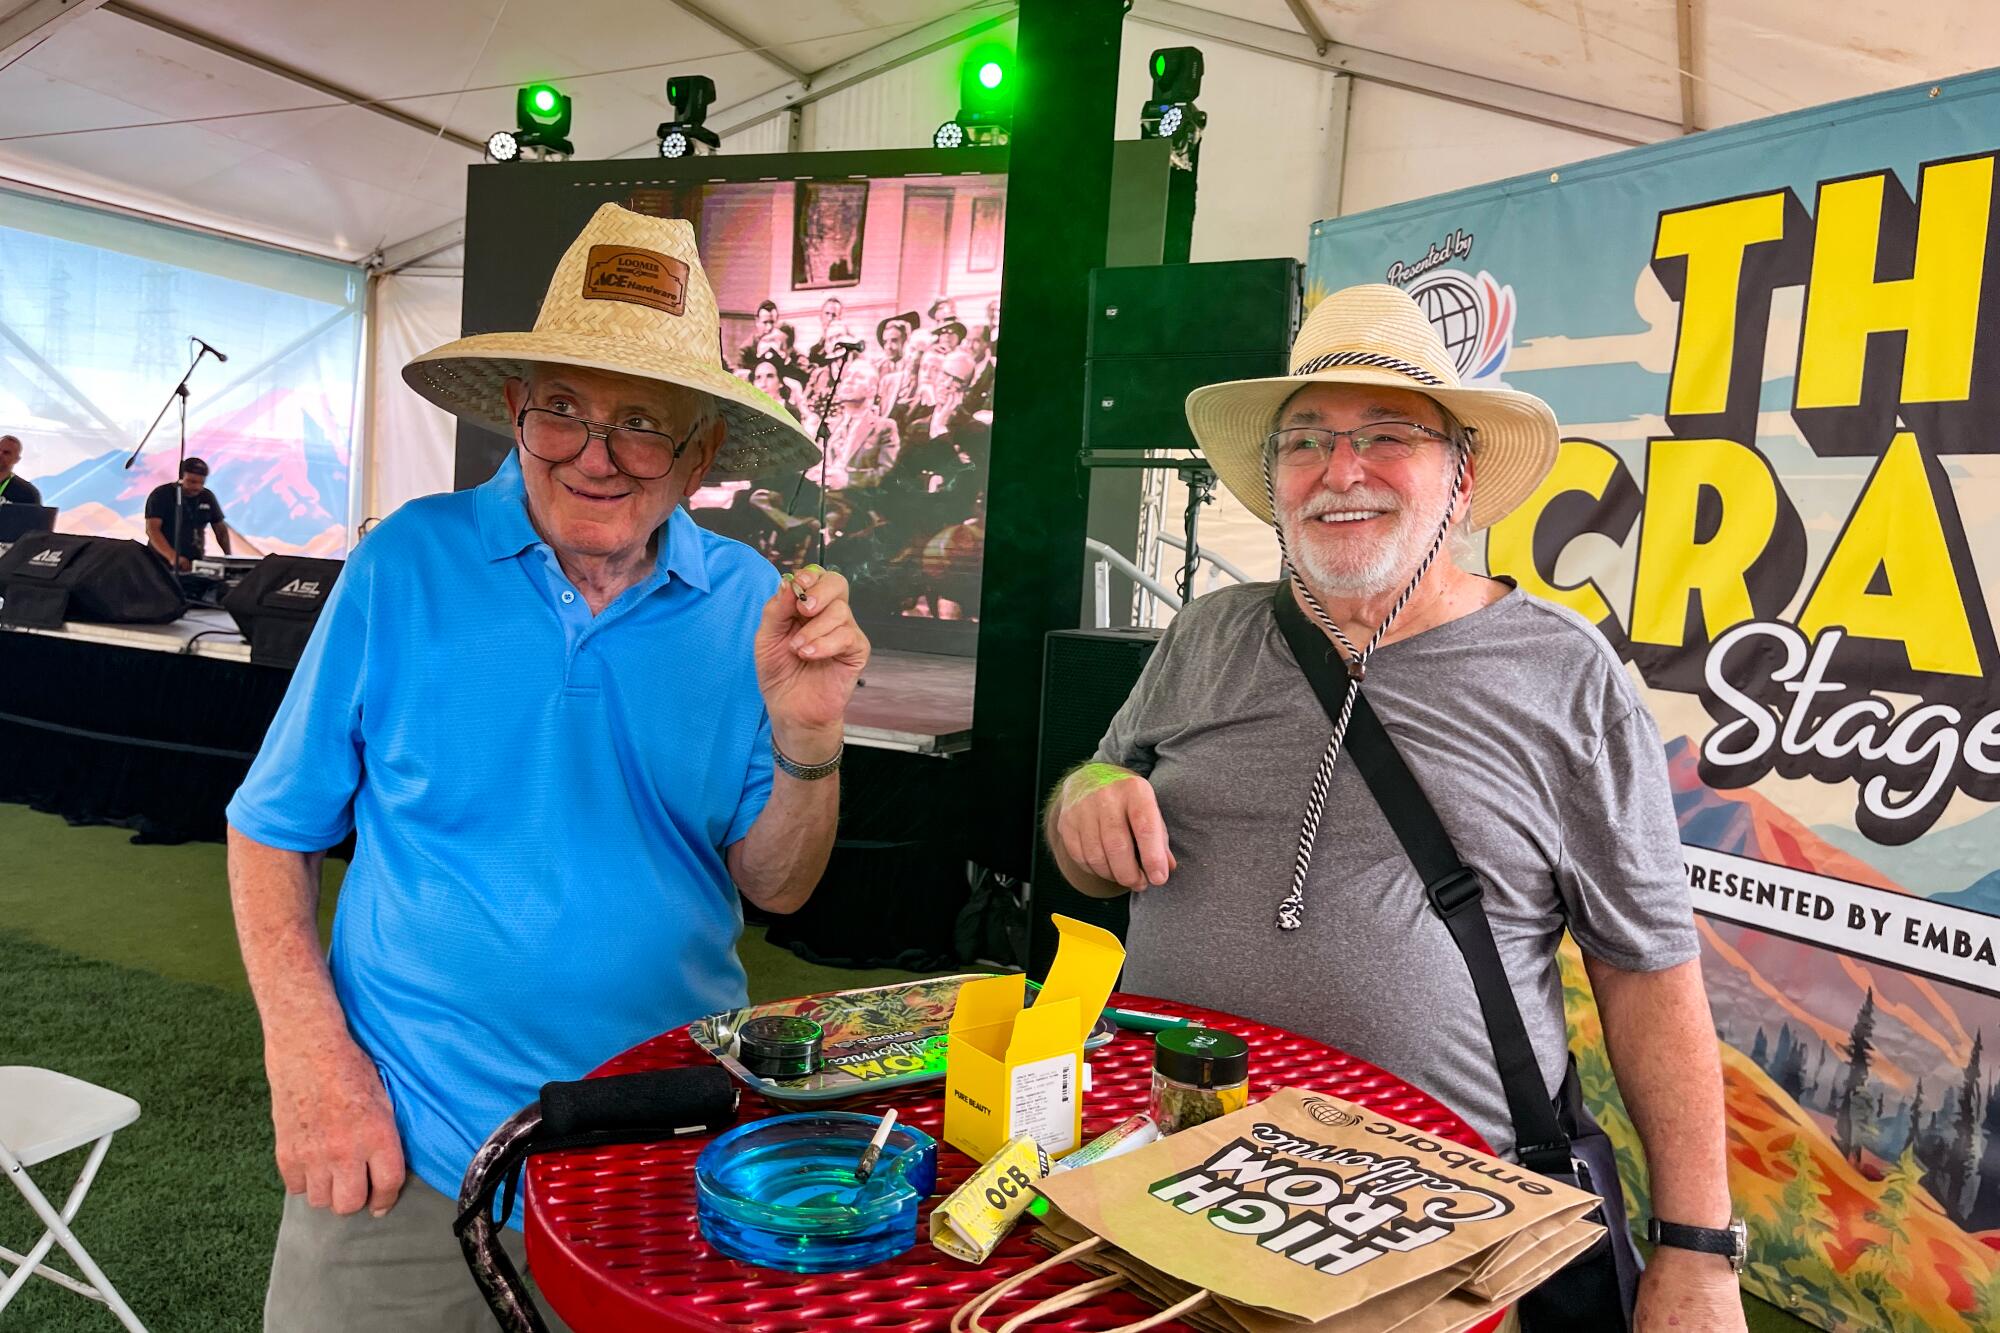 Two men in straw hats smiling and smoking a joint.